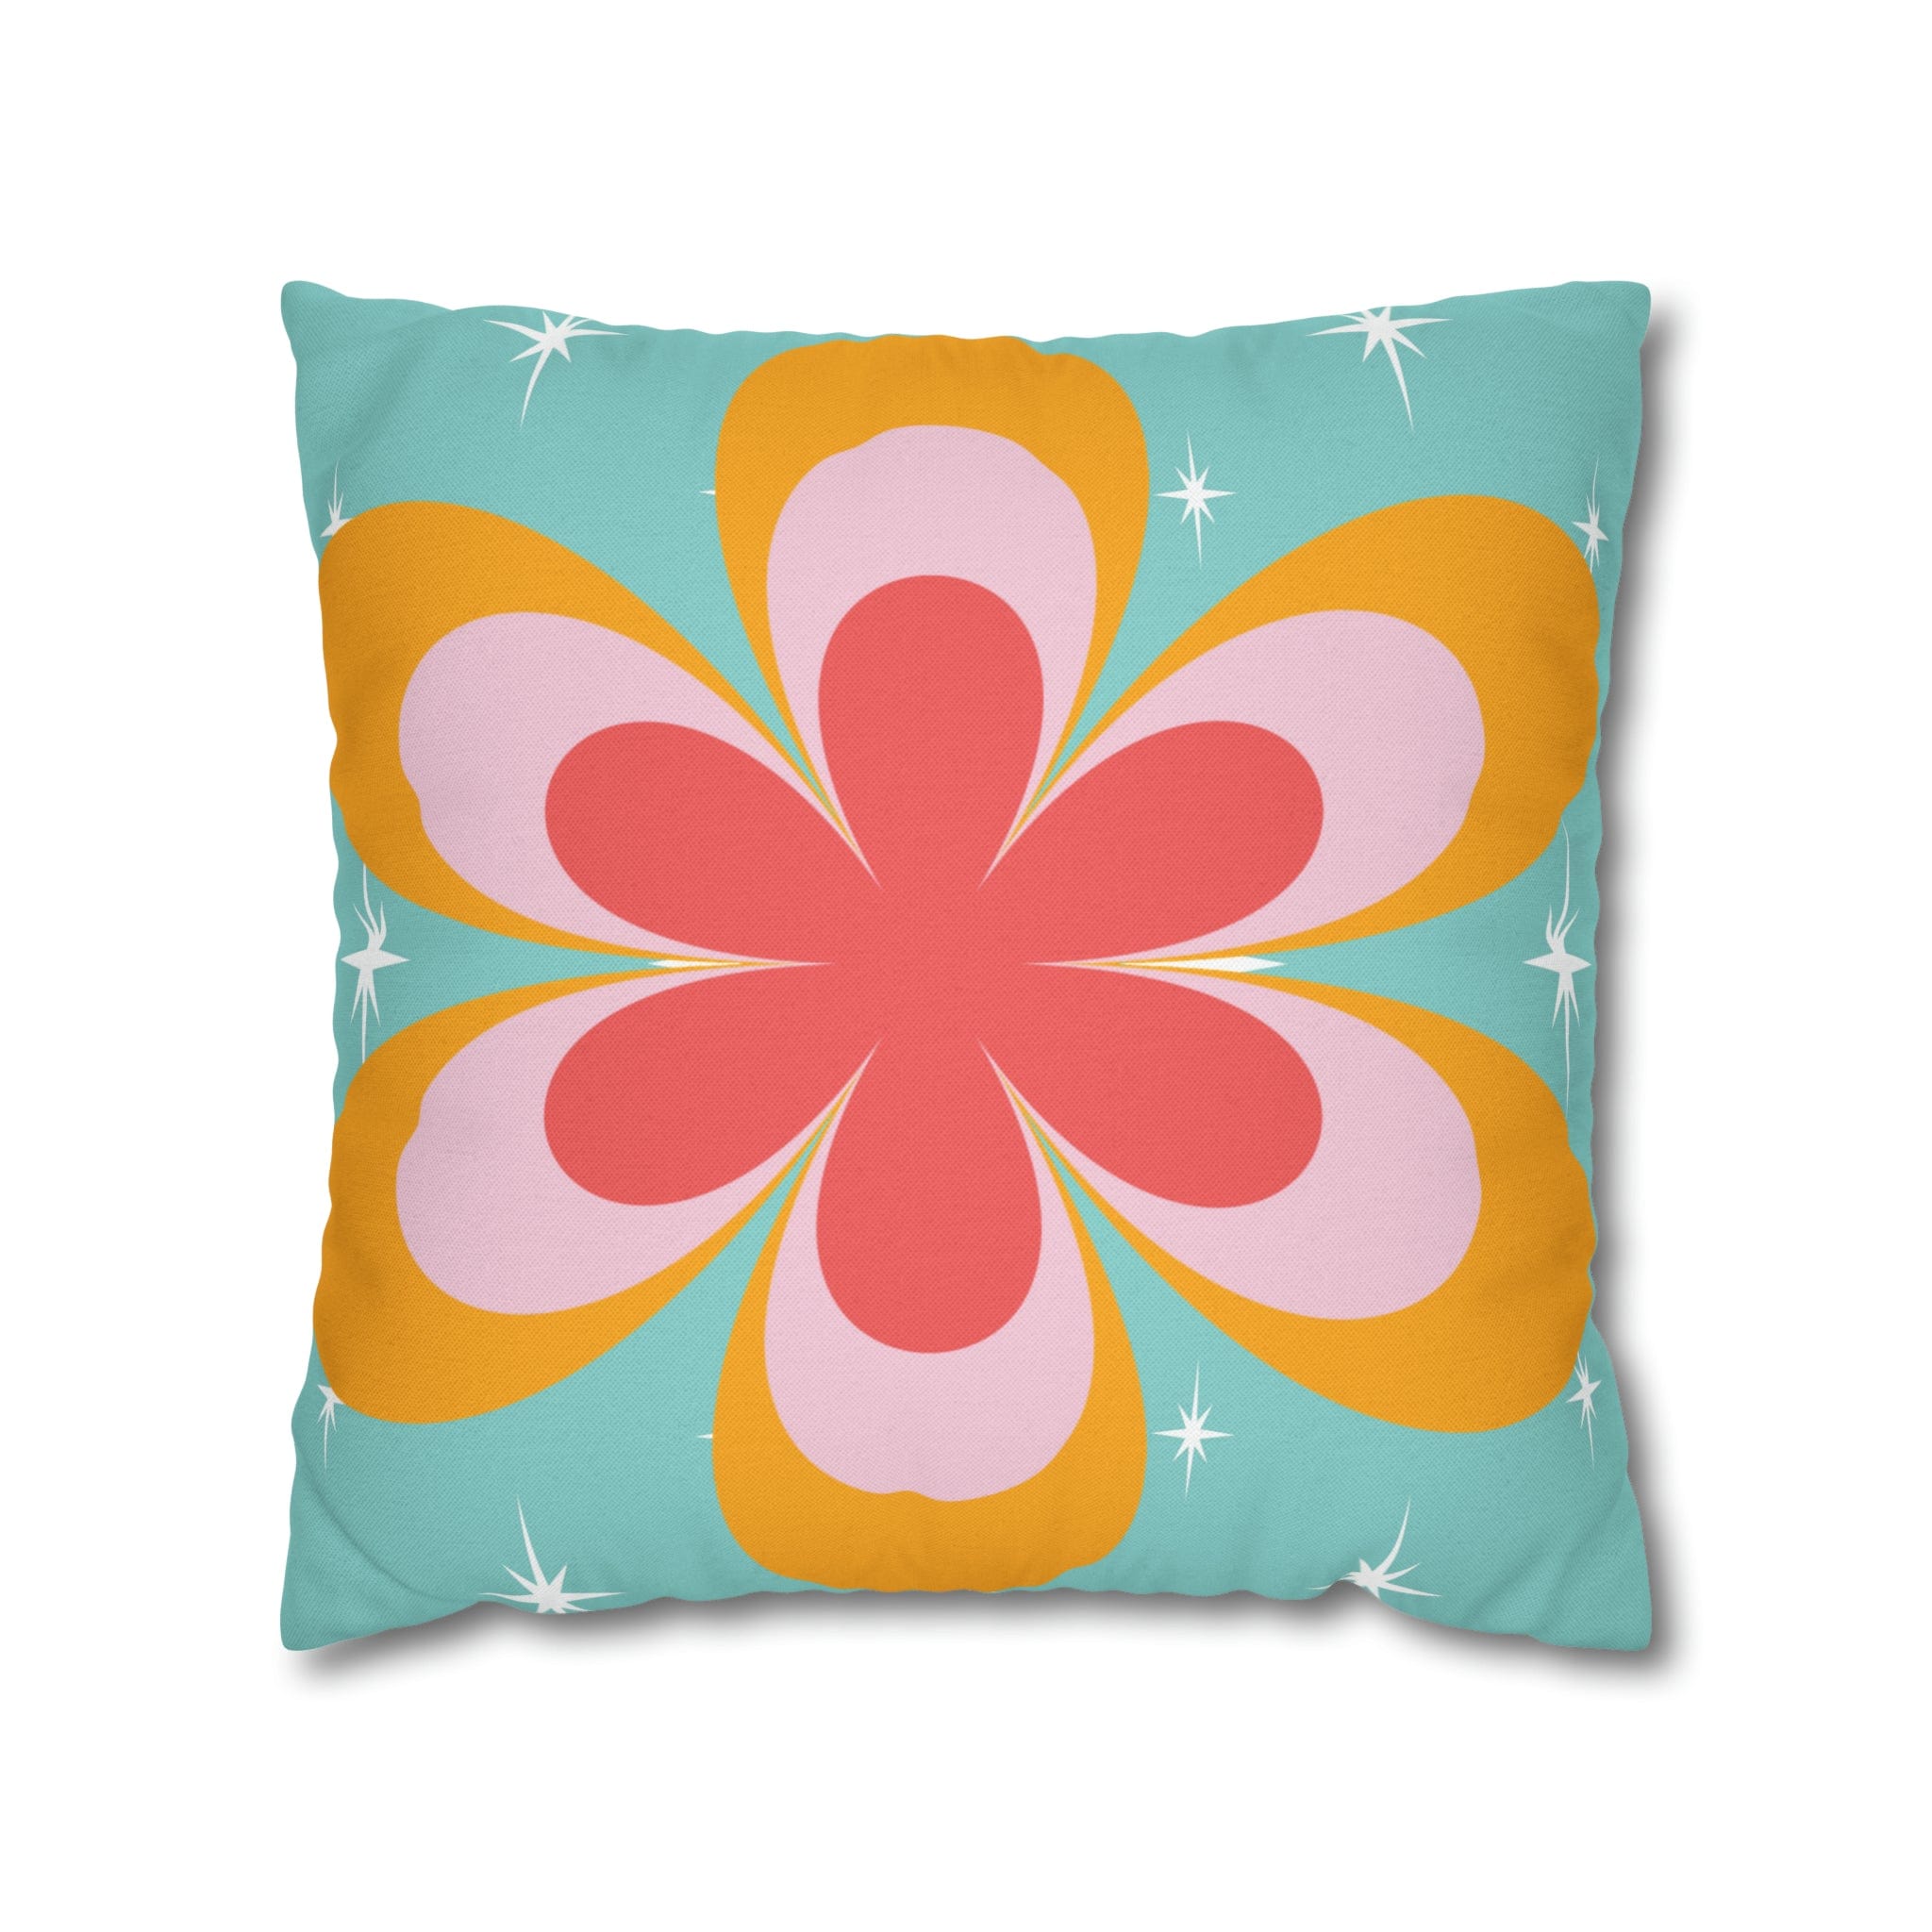 Printify Retro Groovy Daisy Flower Power Throw Pillowcase, Mid Century Modern Starburst Coral, Aqua Blue, Mustard Yellow Accent Pillow Cover Home Decor 18&quot; × 18&quot; 16464659595850168792